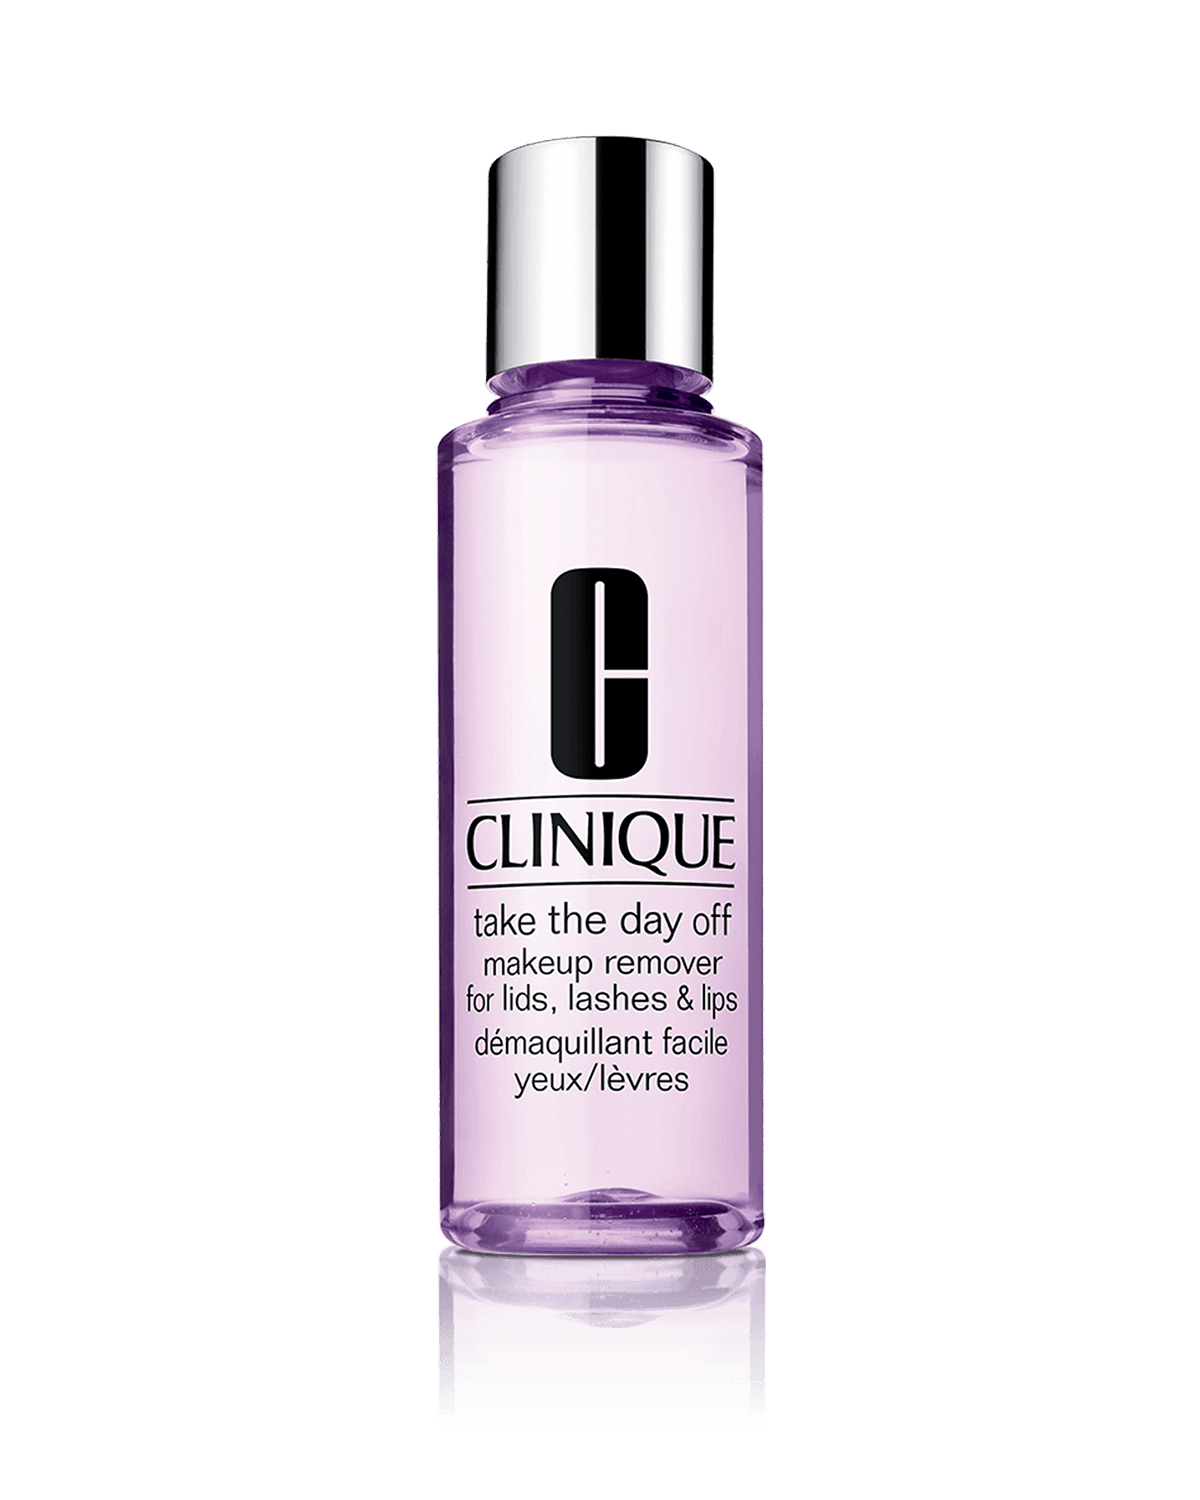 Clinique Take The Day Off Makeup Remover For Lids, Lashes And Lips 125ml